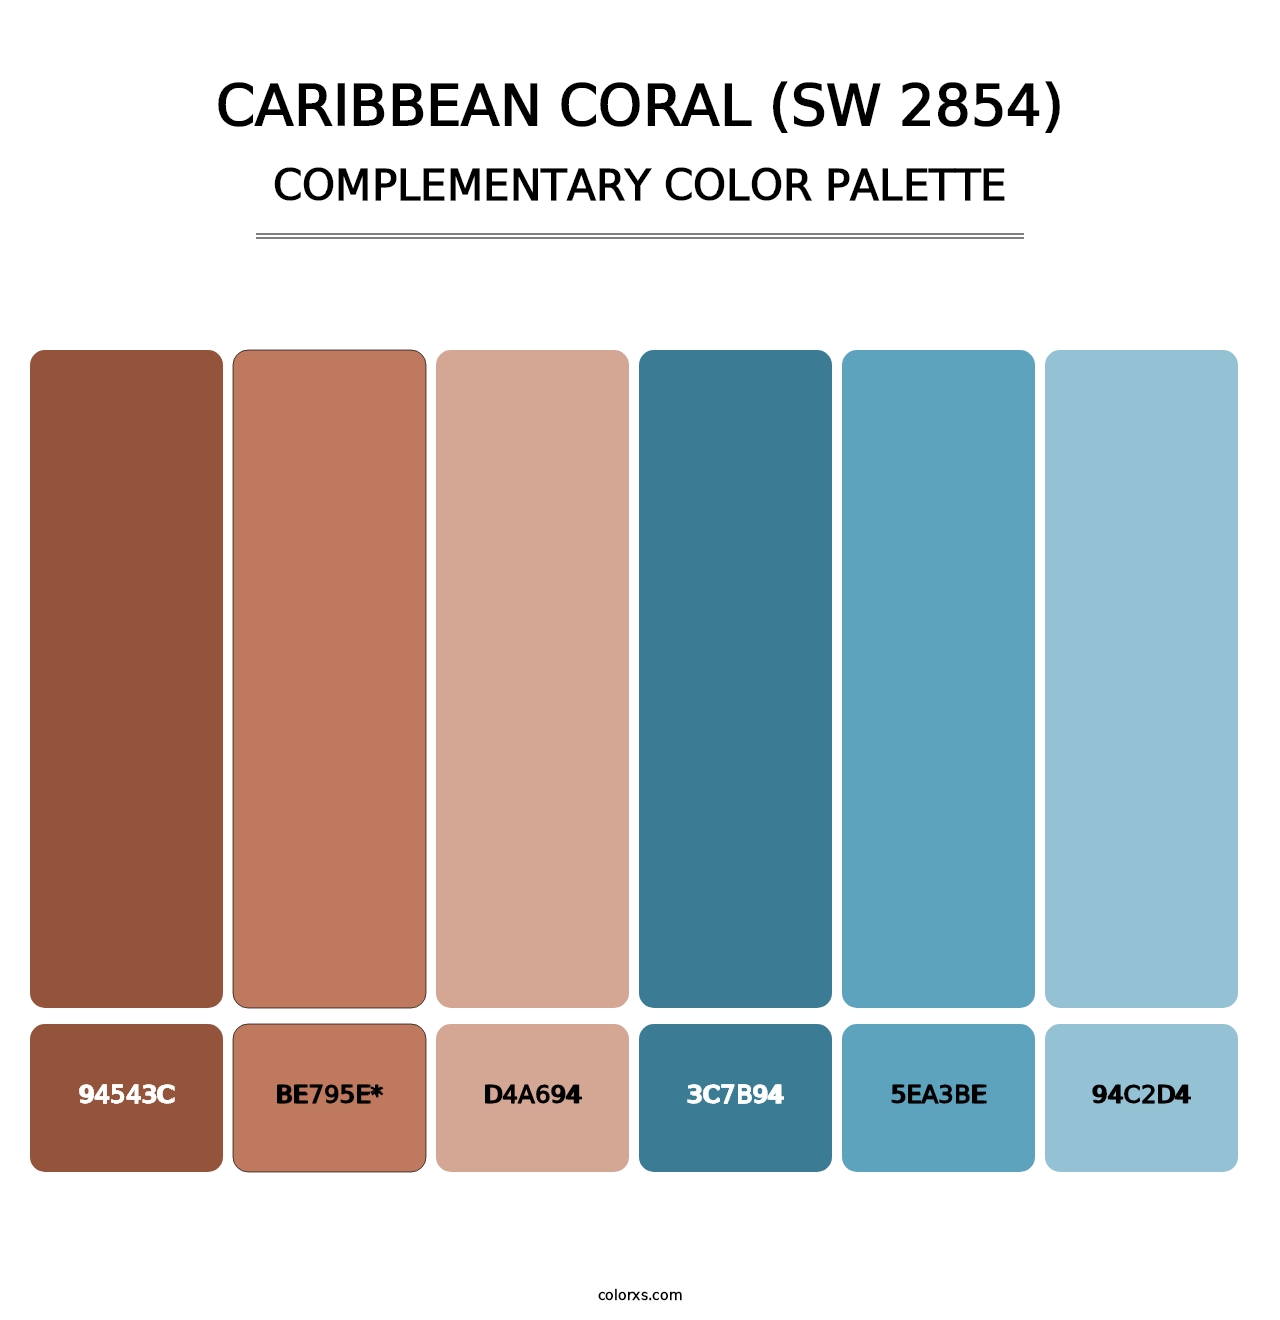 Caribbean Coral (SW 2854) - Complementary Color Palette